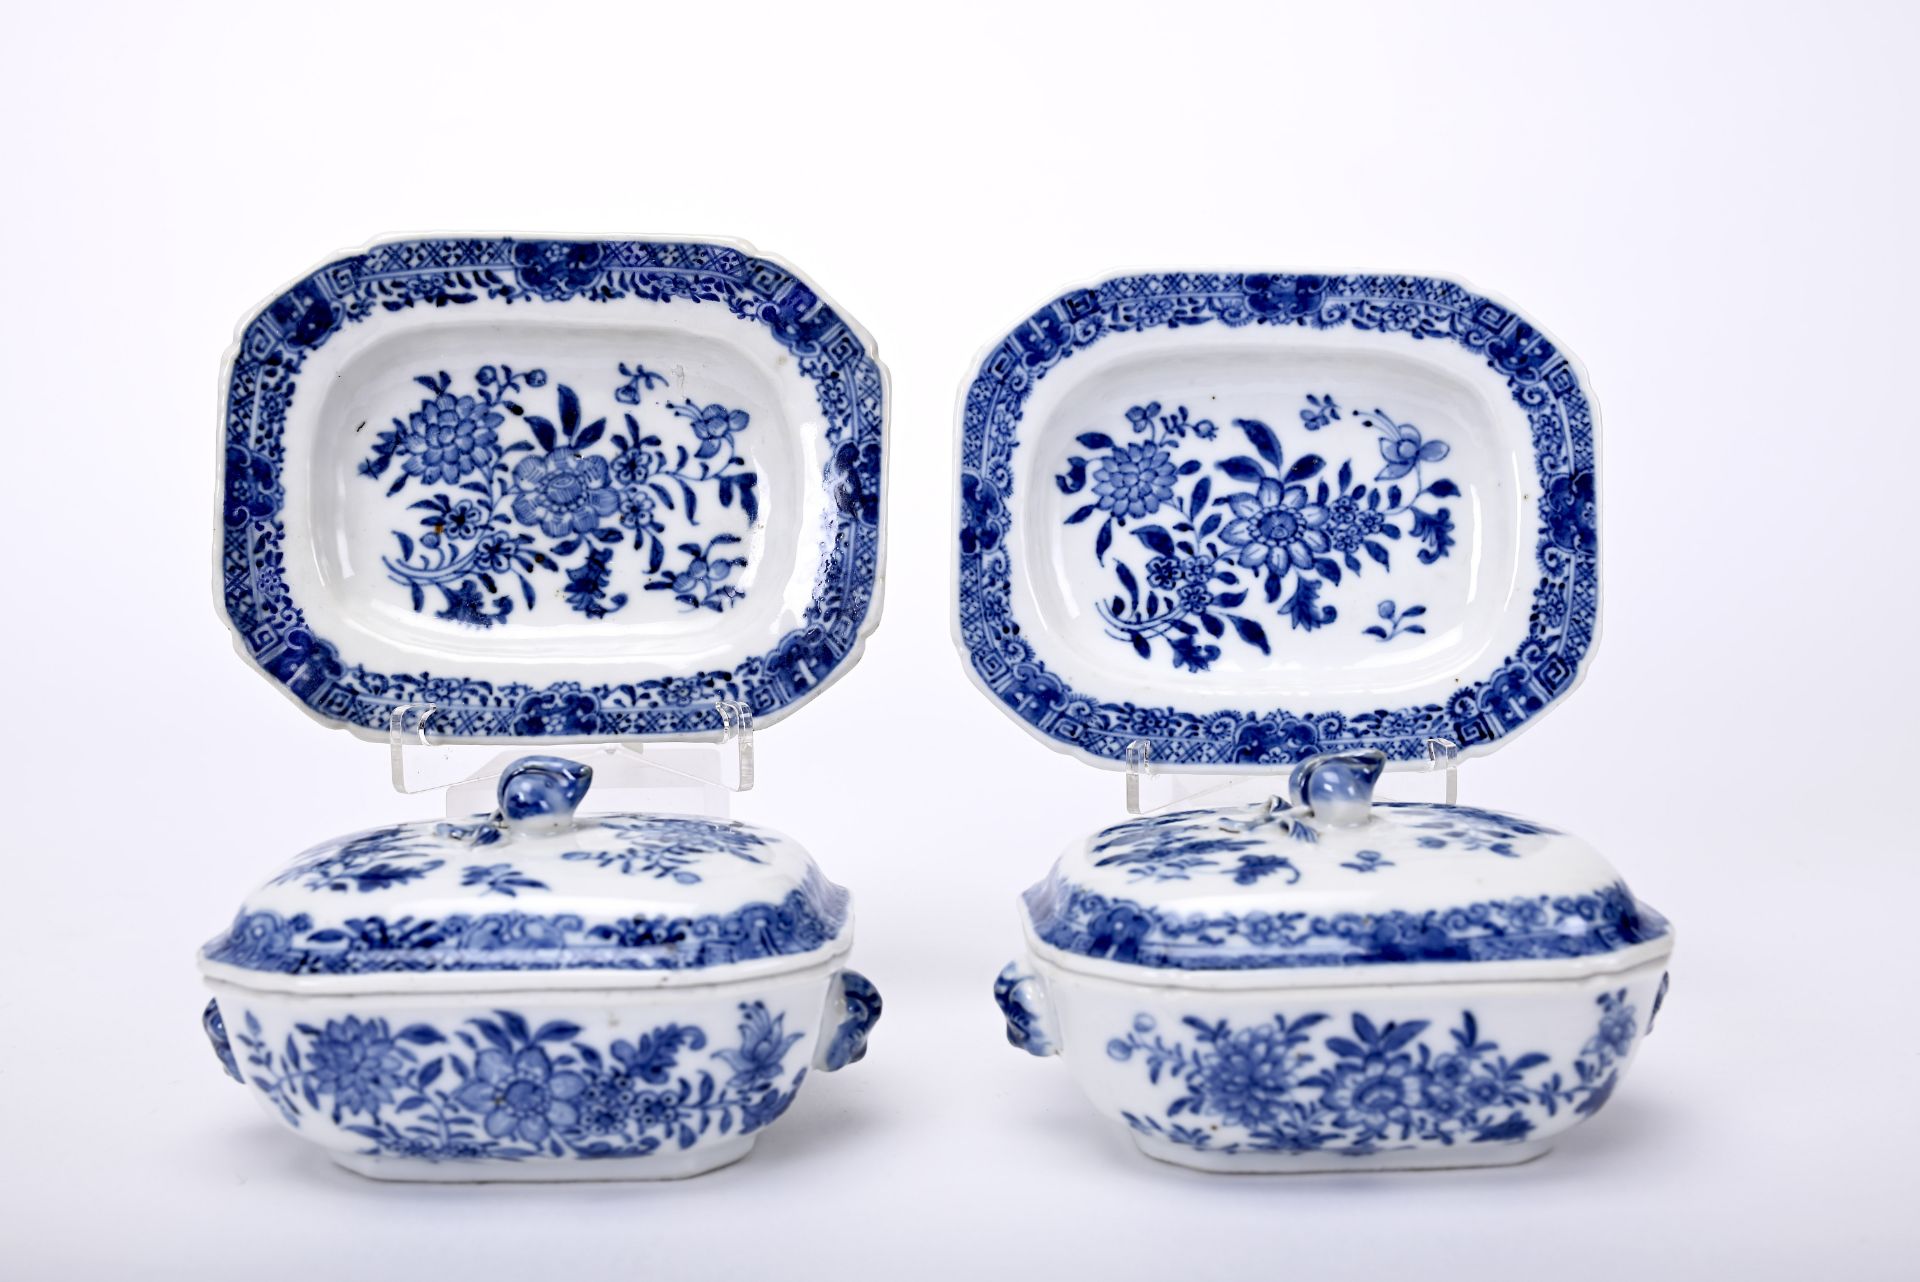 A pair of small tureens with stands